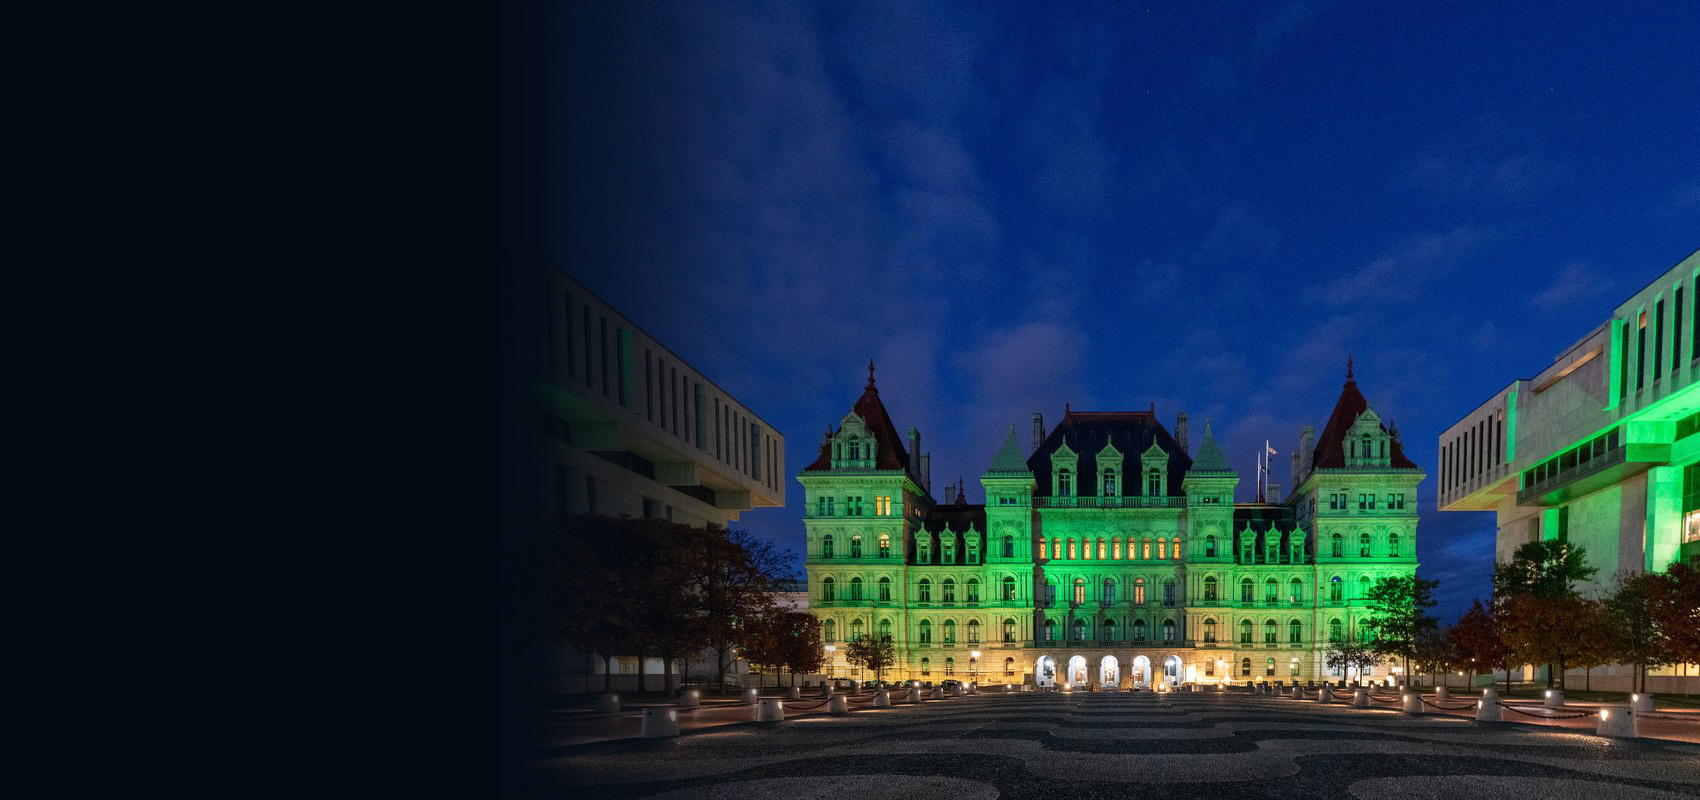 The New York State Capitol in Albany, NY, is illuminated green to mark the start of Mental Health Awareness Month in New York State